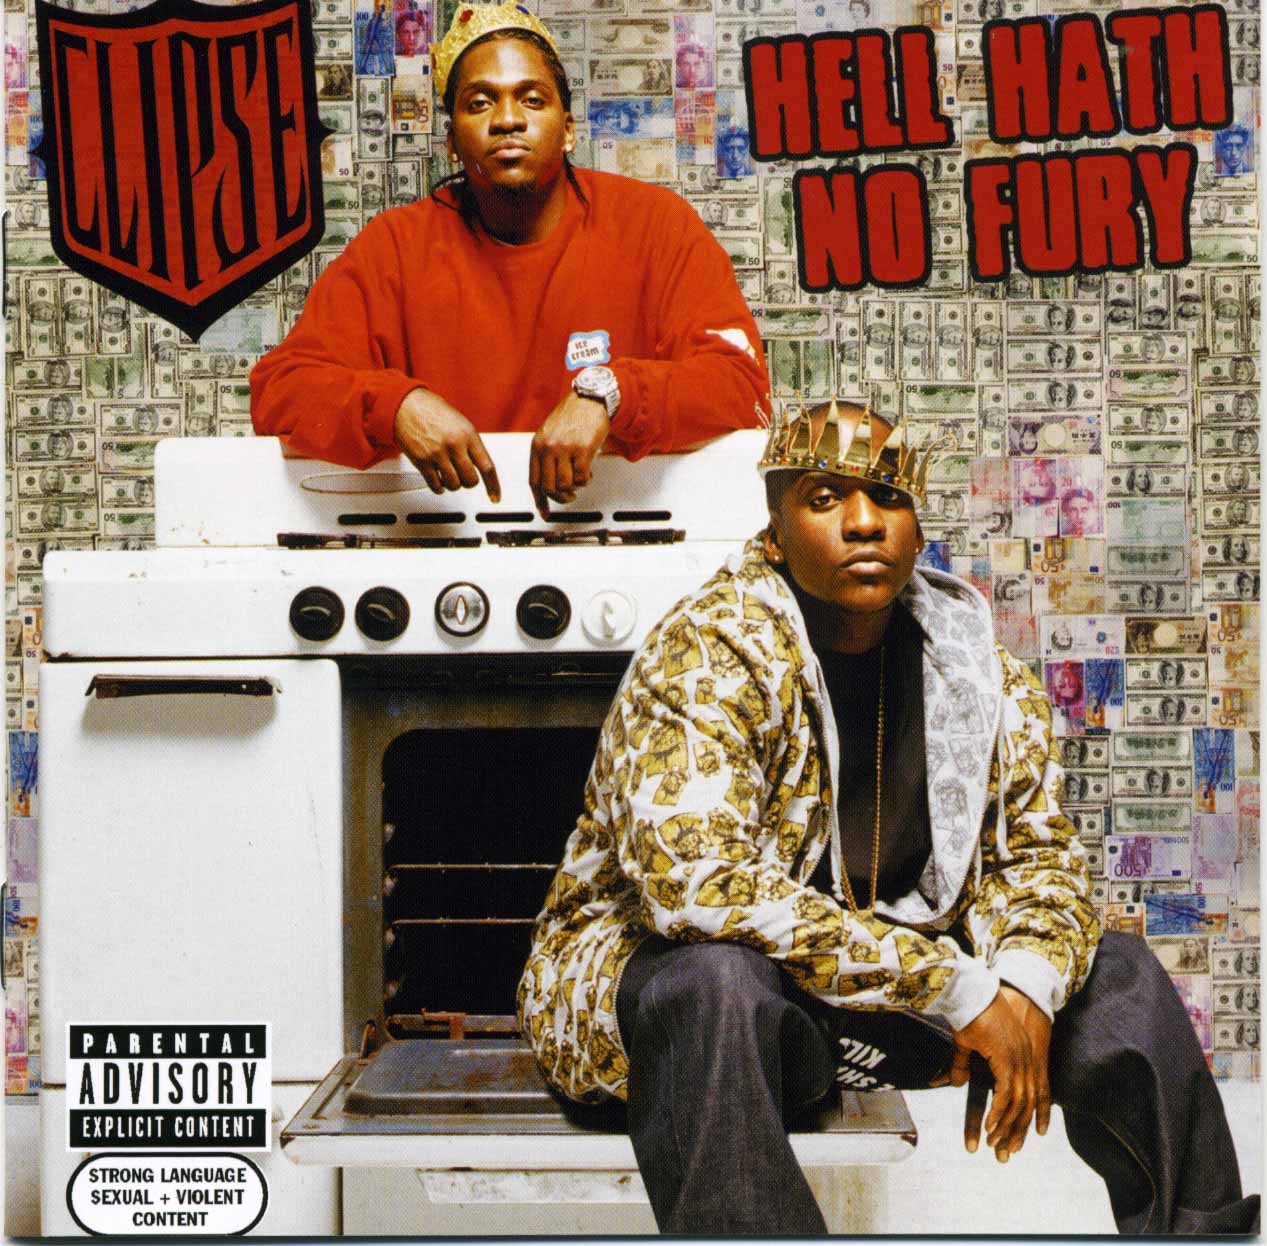 clipse_hell_hath_no_fury_2007_retail_cd-front.jpg